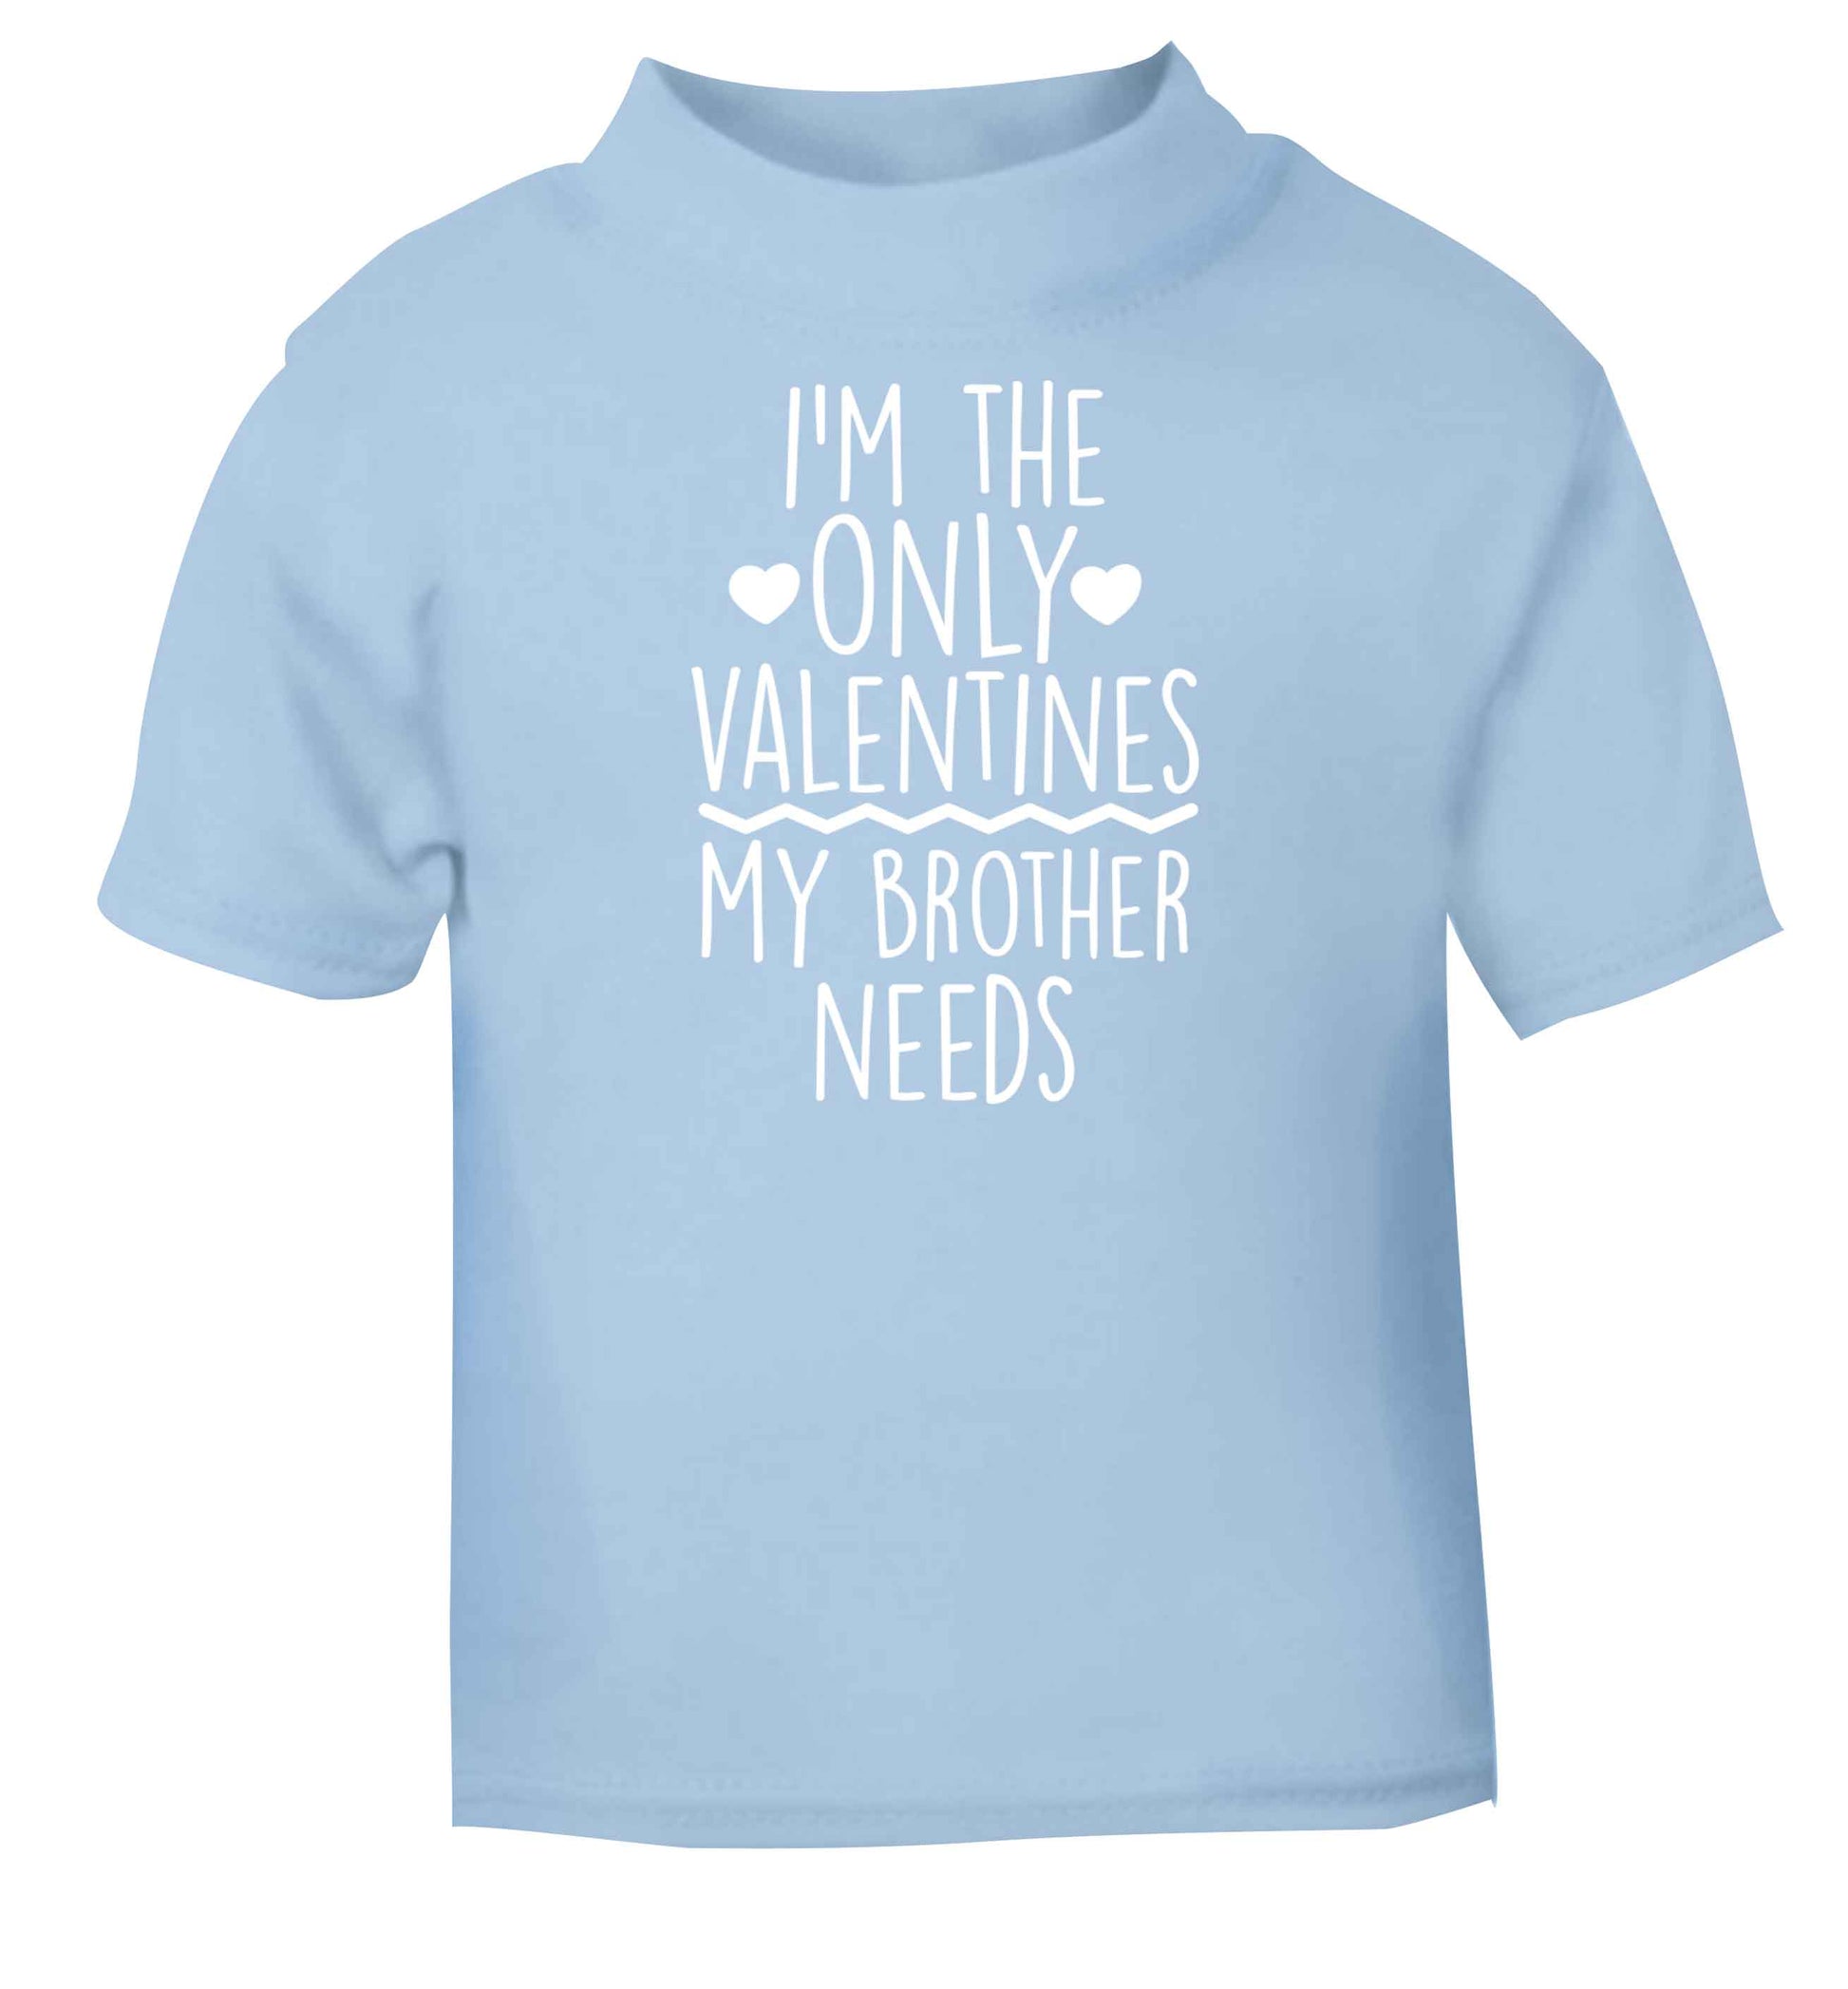 I'm the only valentines my brother needs light blue baby toddler Tshirt 2 Years